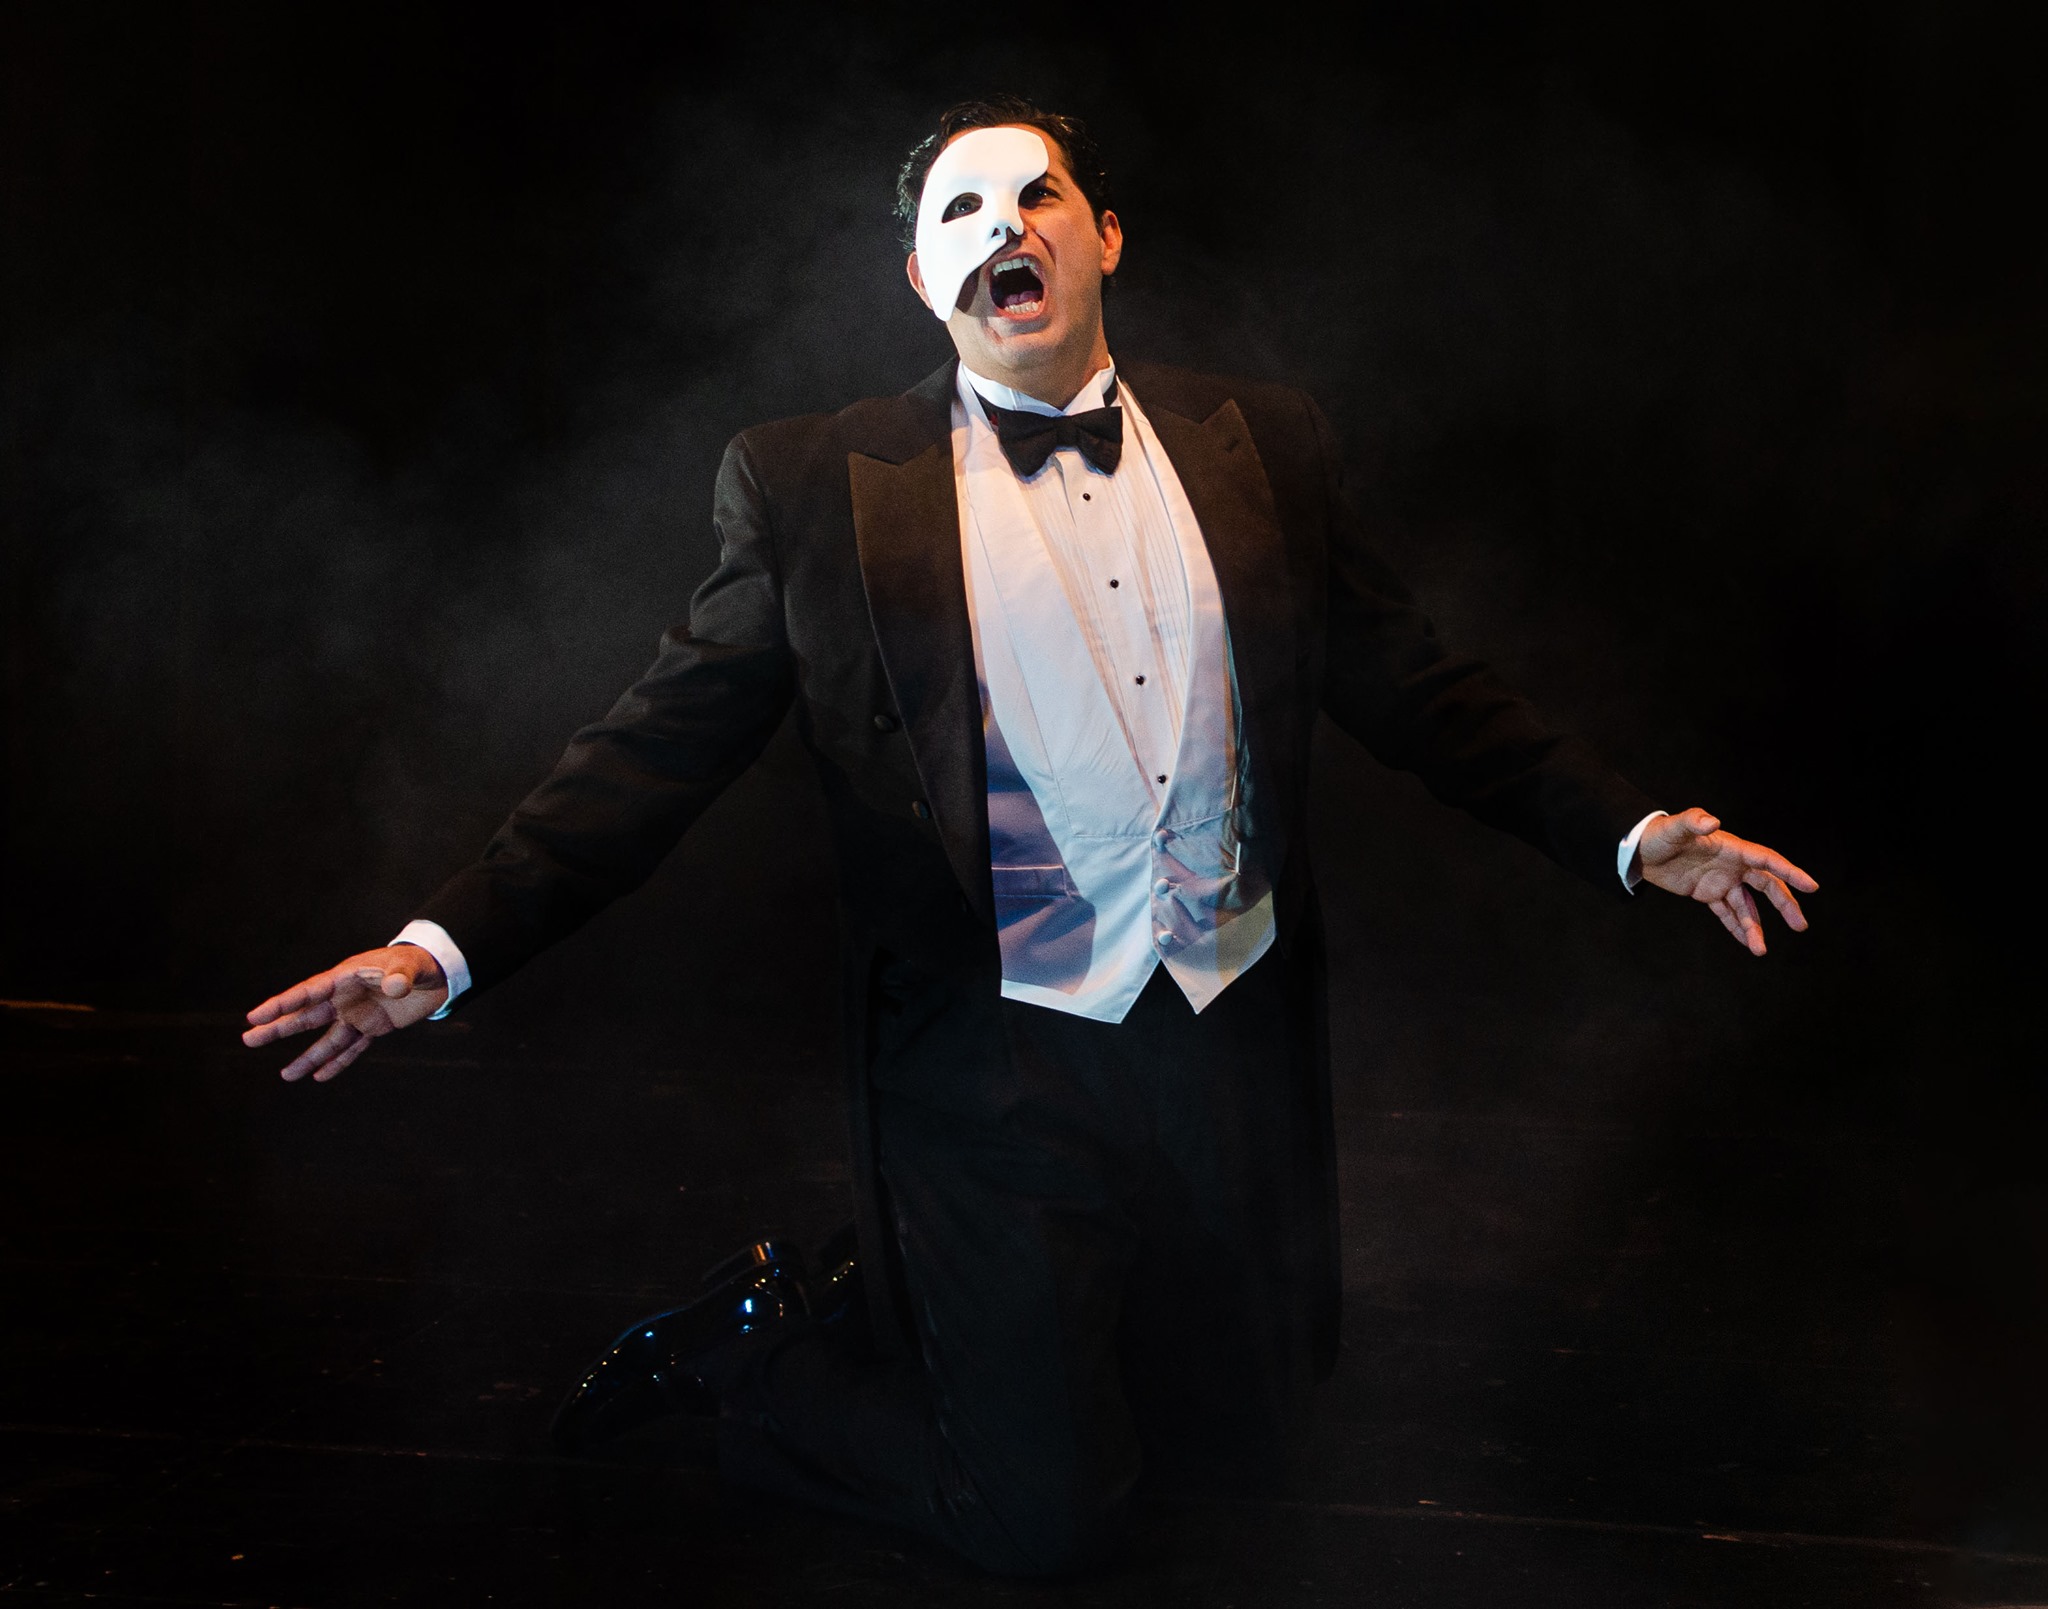  Pedro Rodelas as the Phantom of the Opera from Ohlone College and Stage 1’s co-production of The Phantom of the Opera 